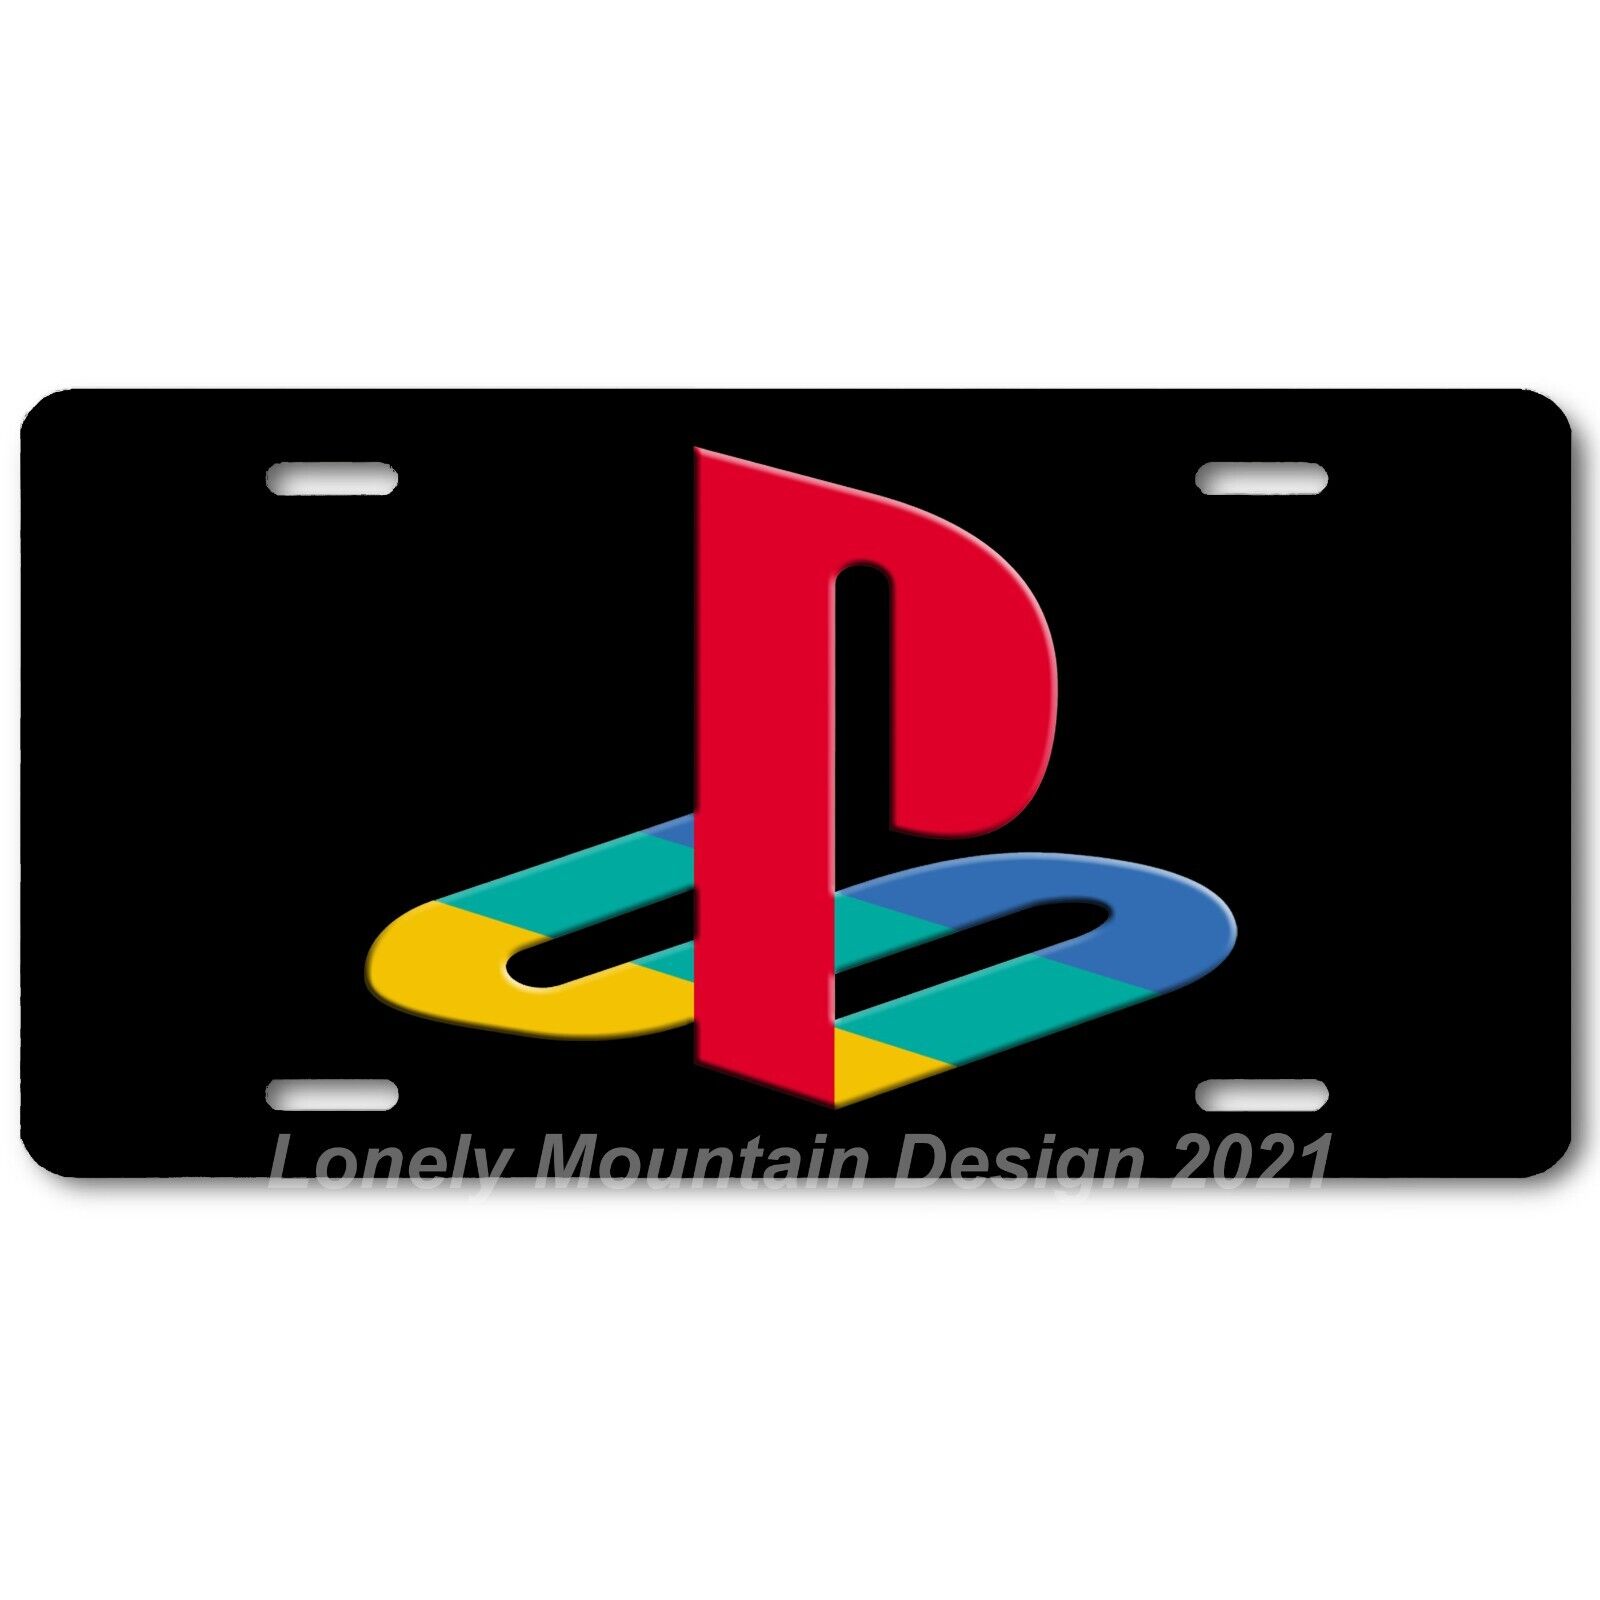 Sony Playstation Inspired Art on Black FLAT Aluminum Novelty License Tag Plate